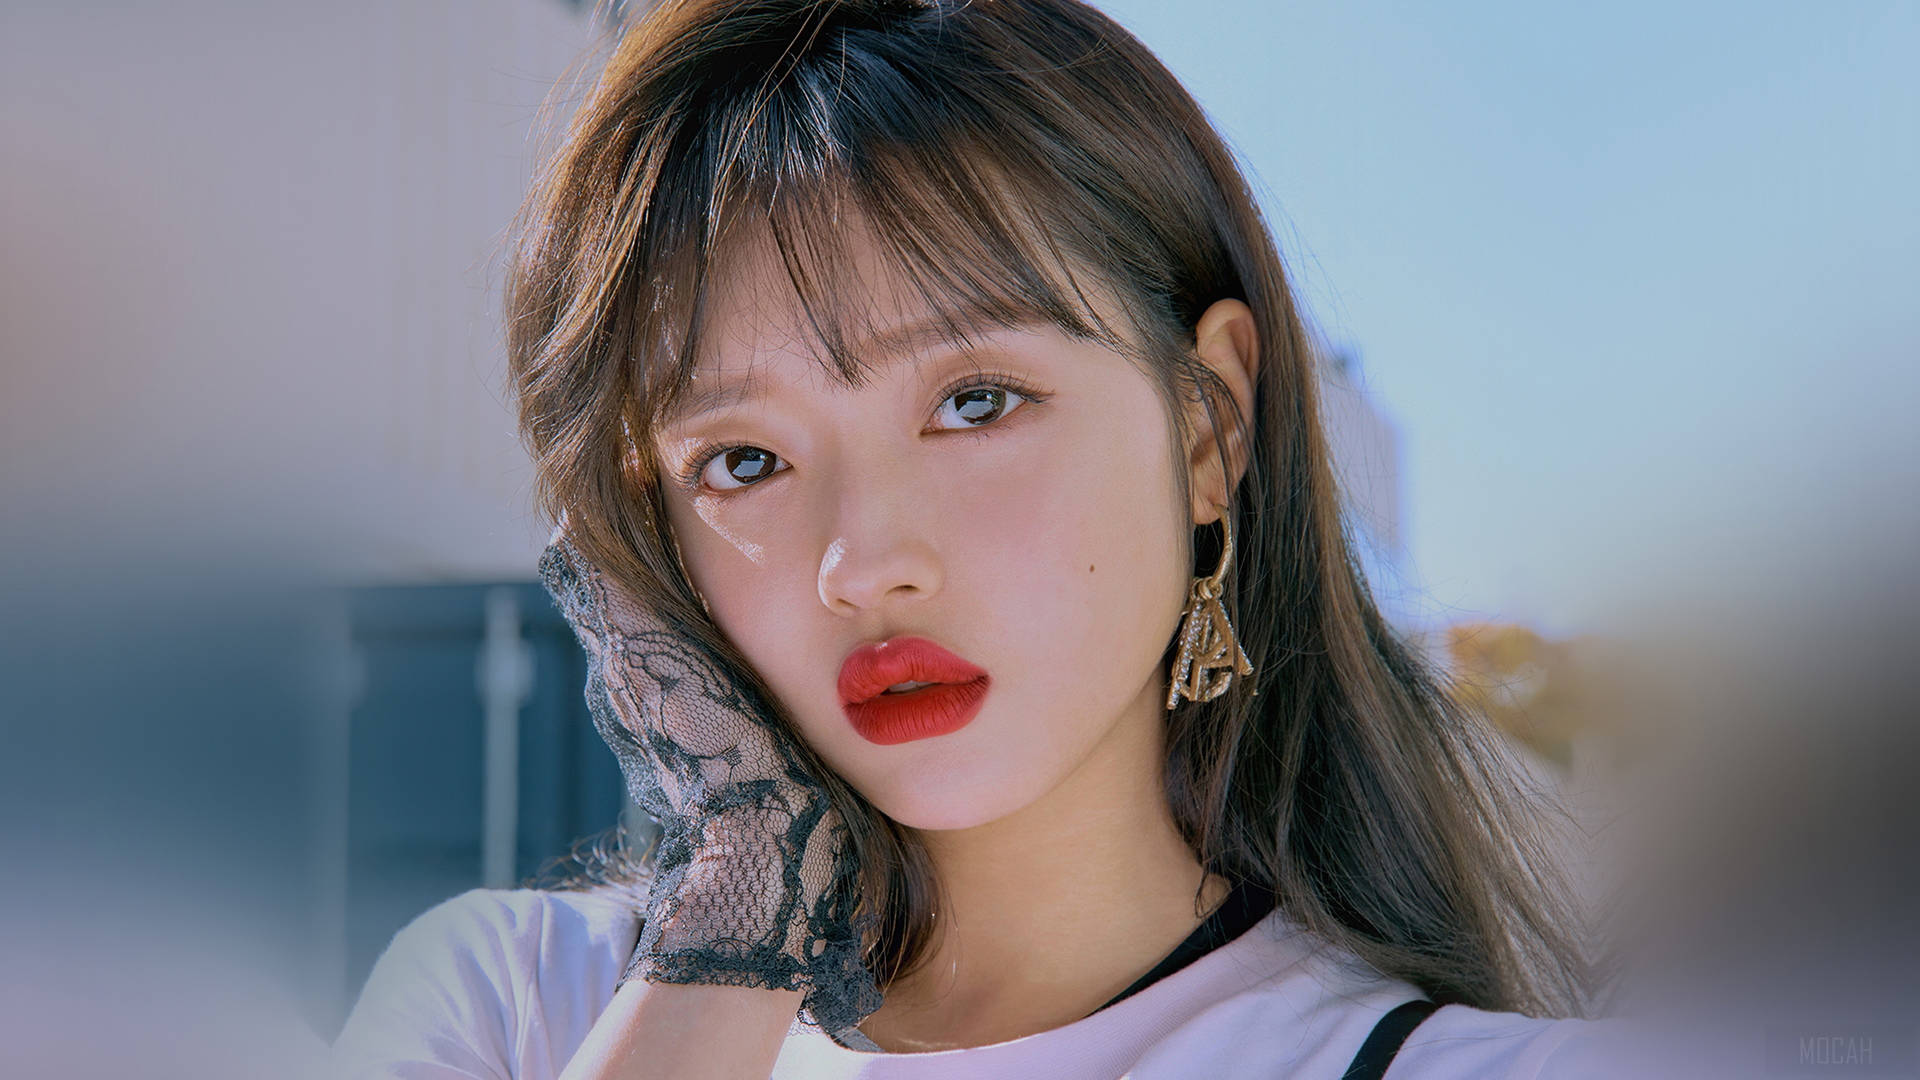 Elegance Redefined - Oh My Girl's Yooa In Red Lips Background